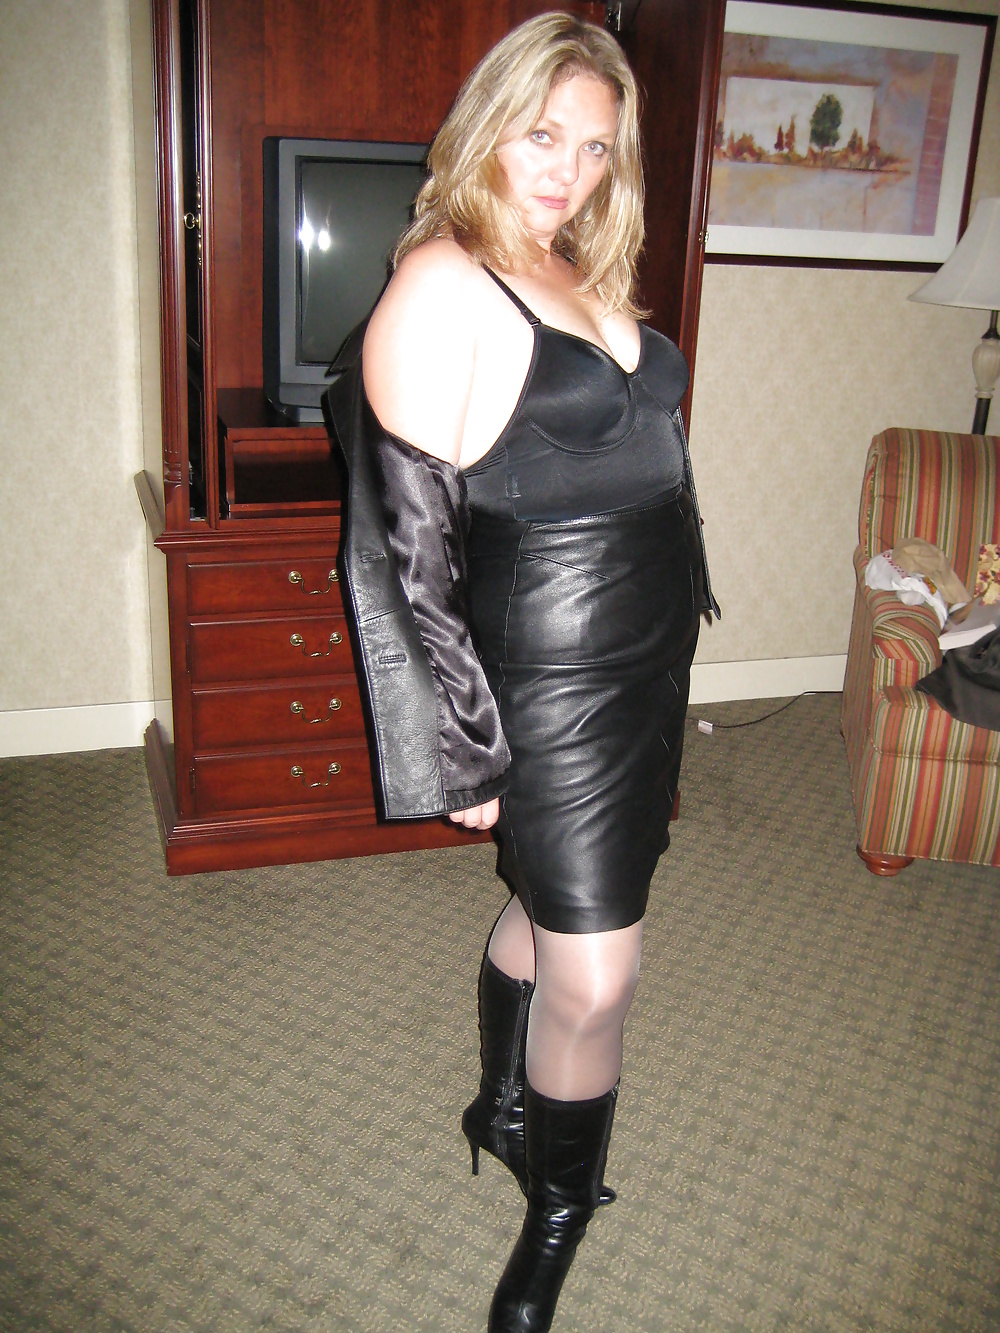 Cougar in Leather Skirt #34893011